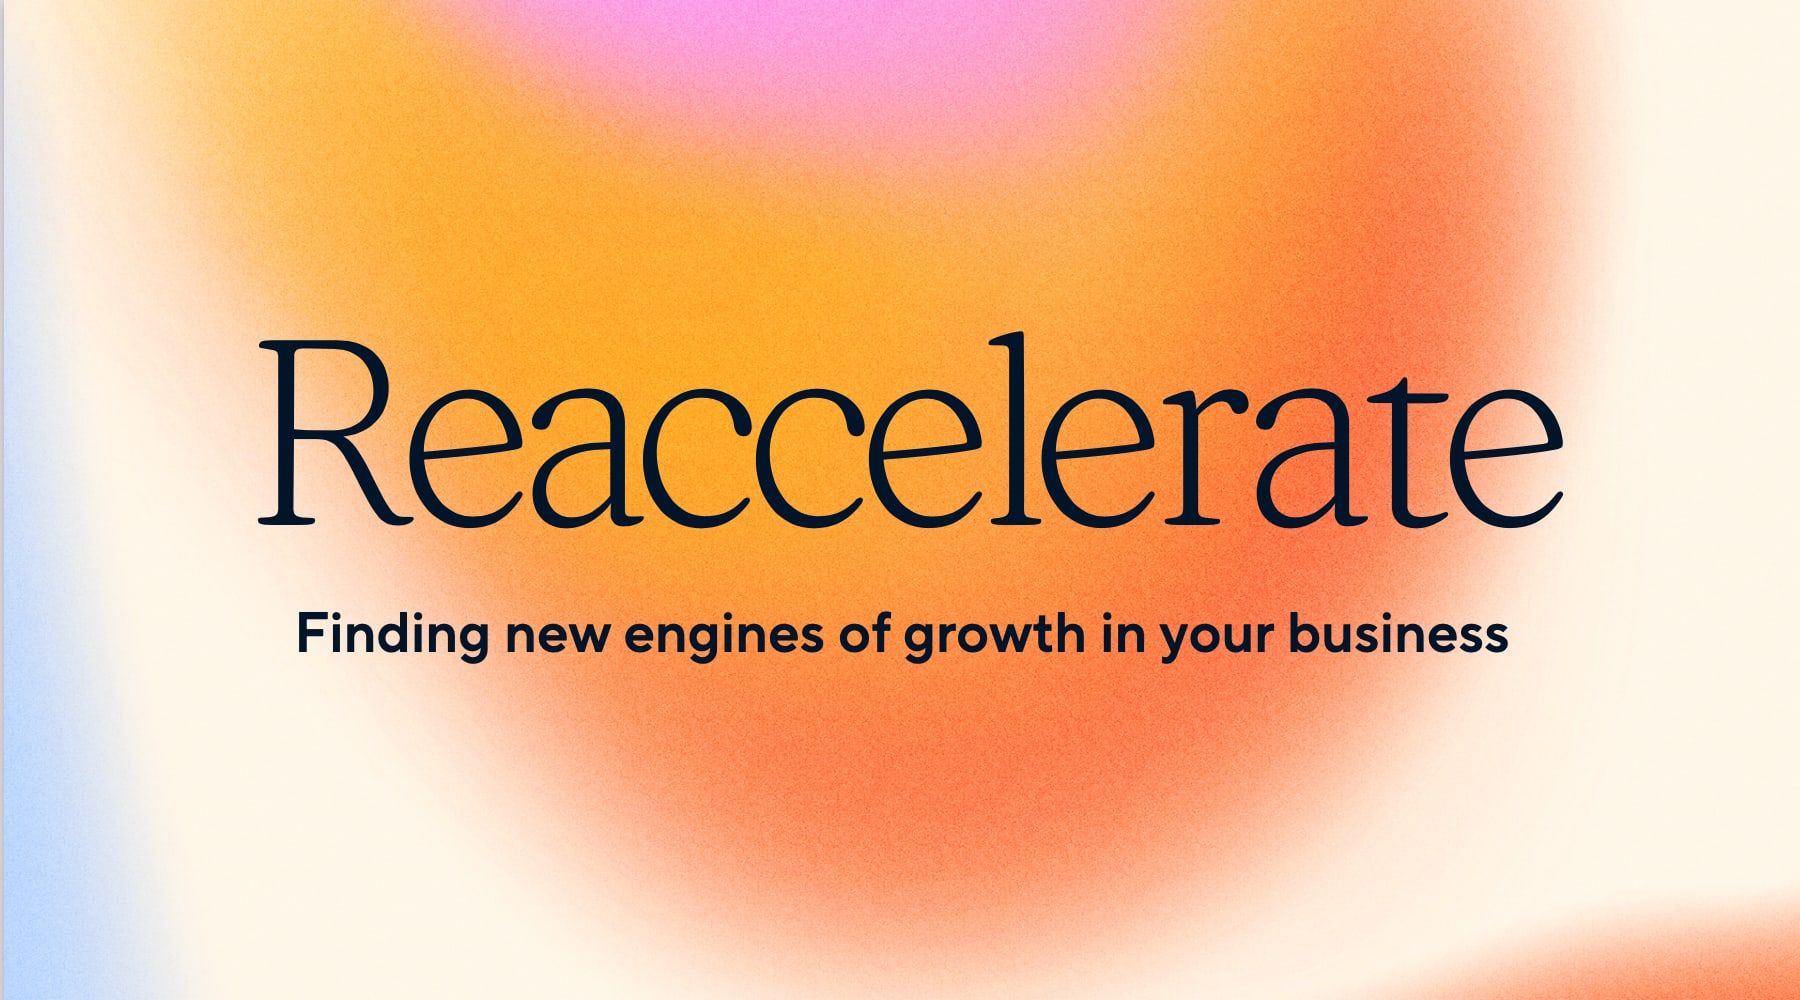 Reaccelerate: Finding new engines of growth in your business